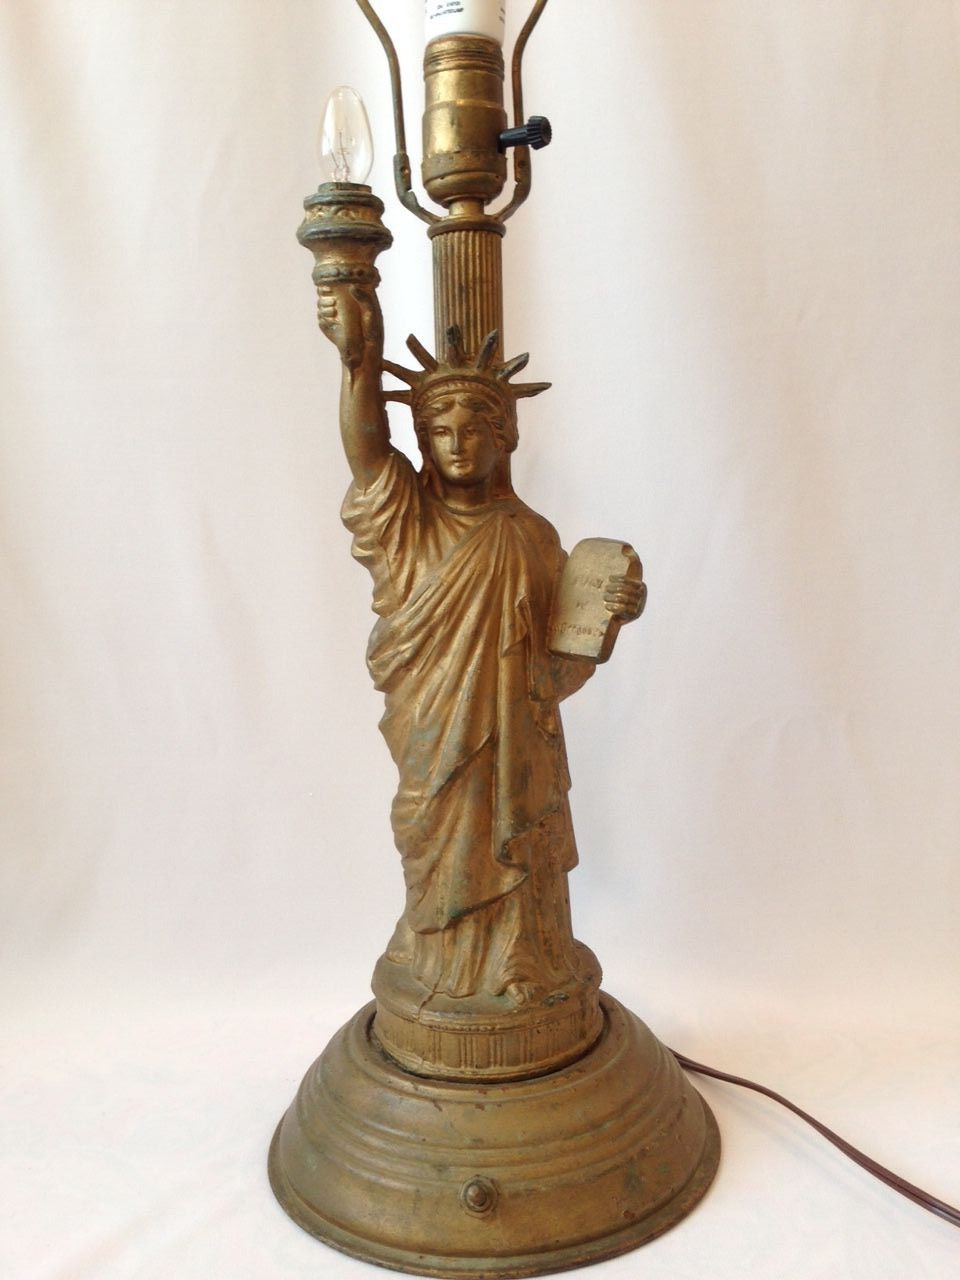 Antique Statue of Liberty Table Lamp with Flame Glass Bulb and New Wiring -2.jpg